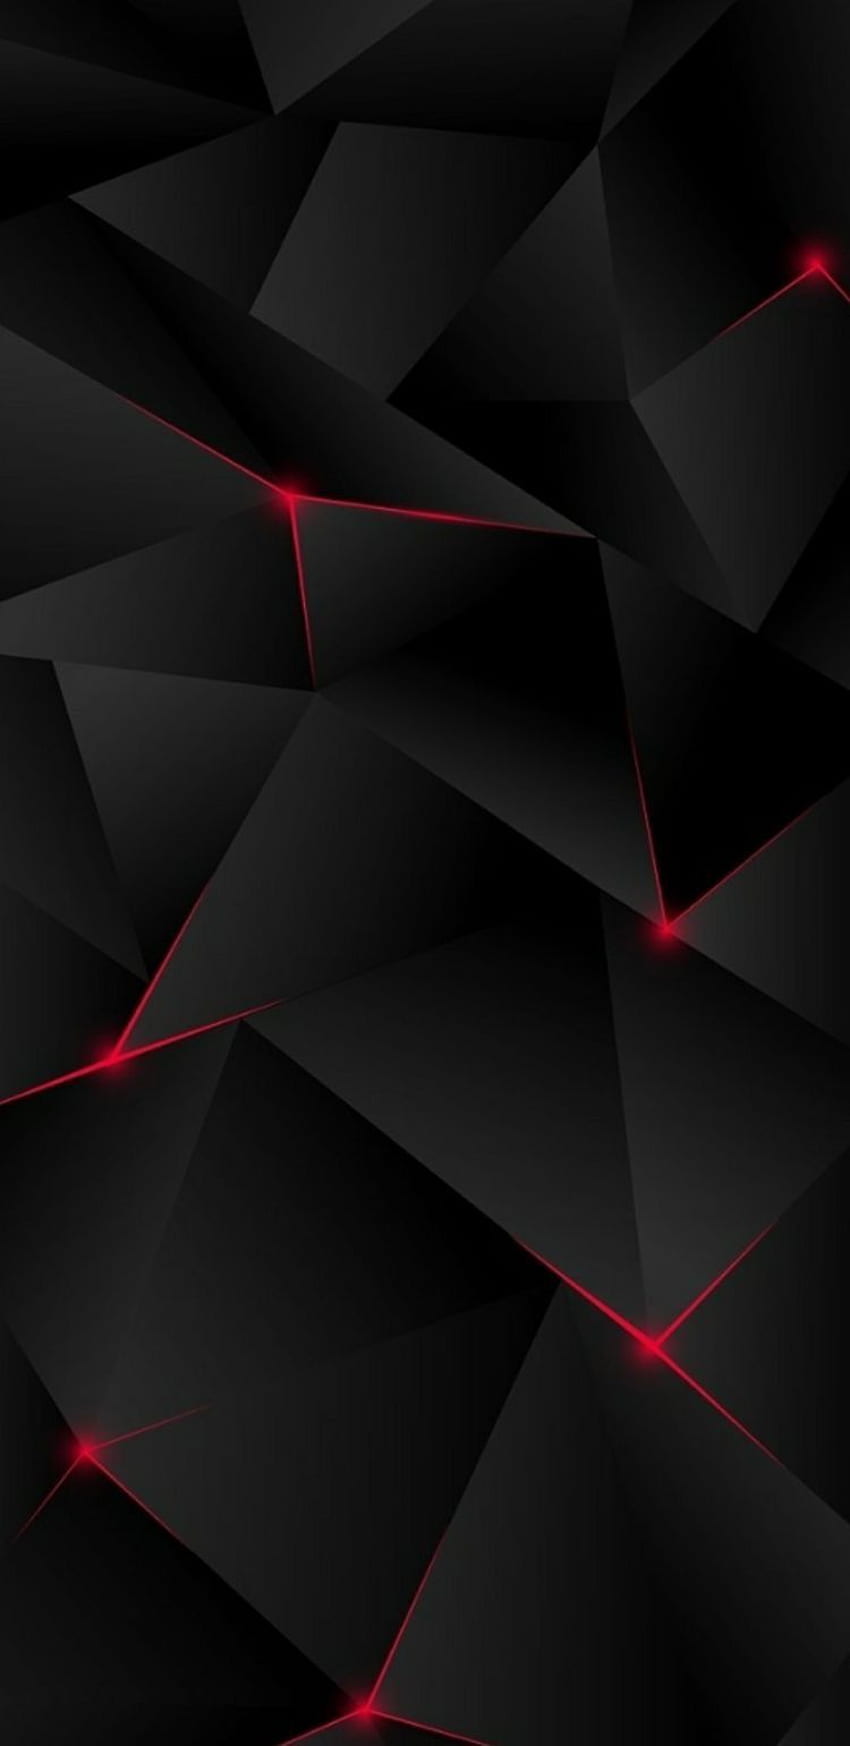 Black Themed For Mobile , Black and Red Mobile HD phone wallpaper